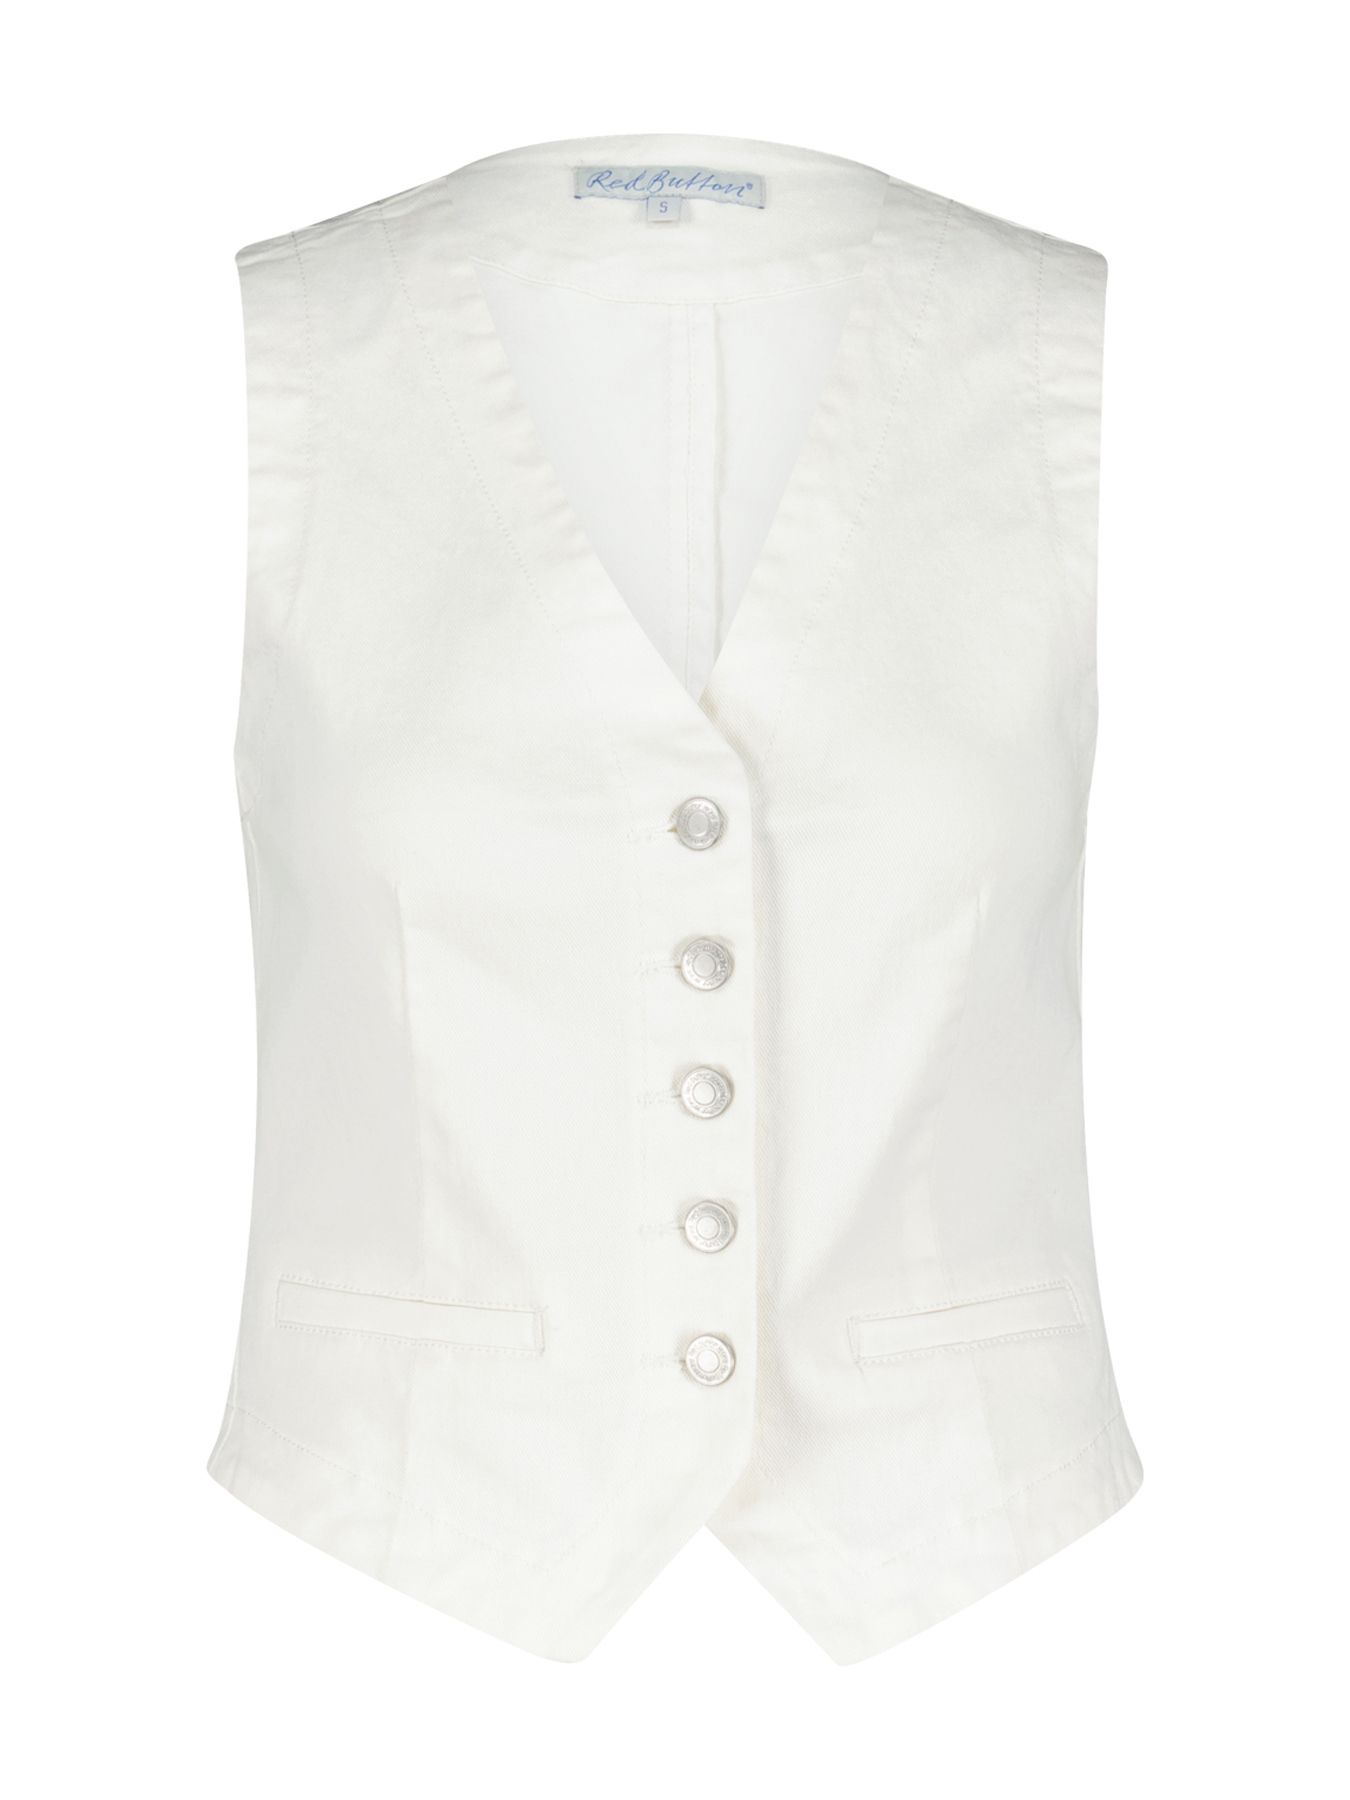 Red Button Waistcoat offwhite offwhite38 2900141054031